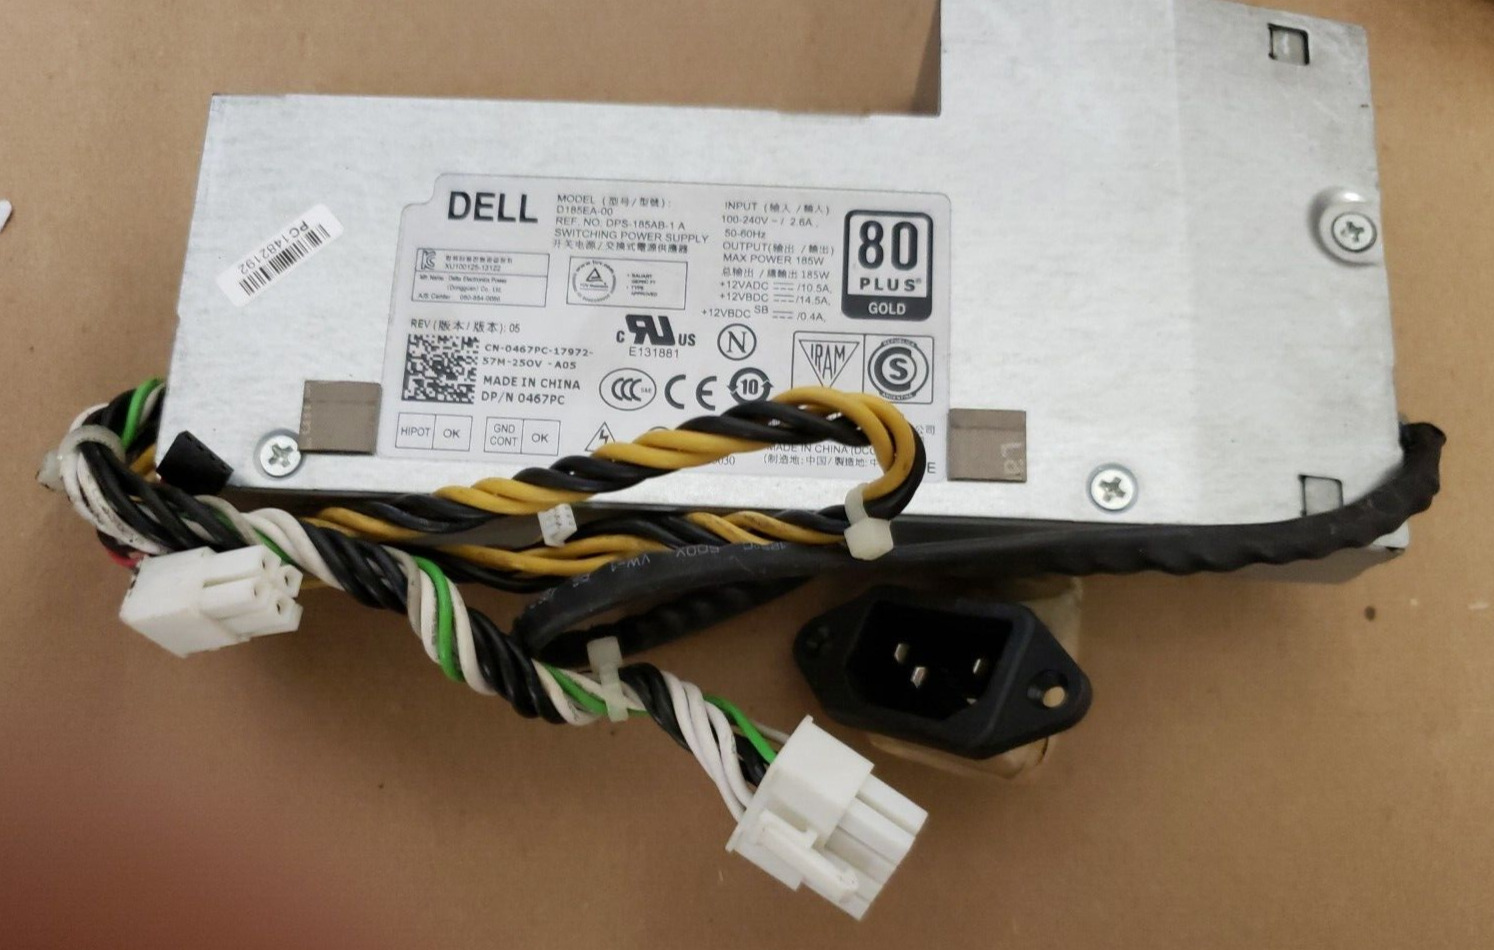 Dell OptiPlex 9030 467PC Power Supply All-In-One 185W TESTED GOOD